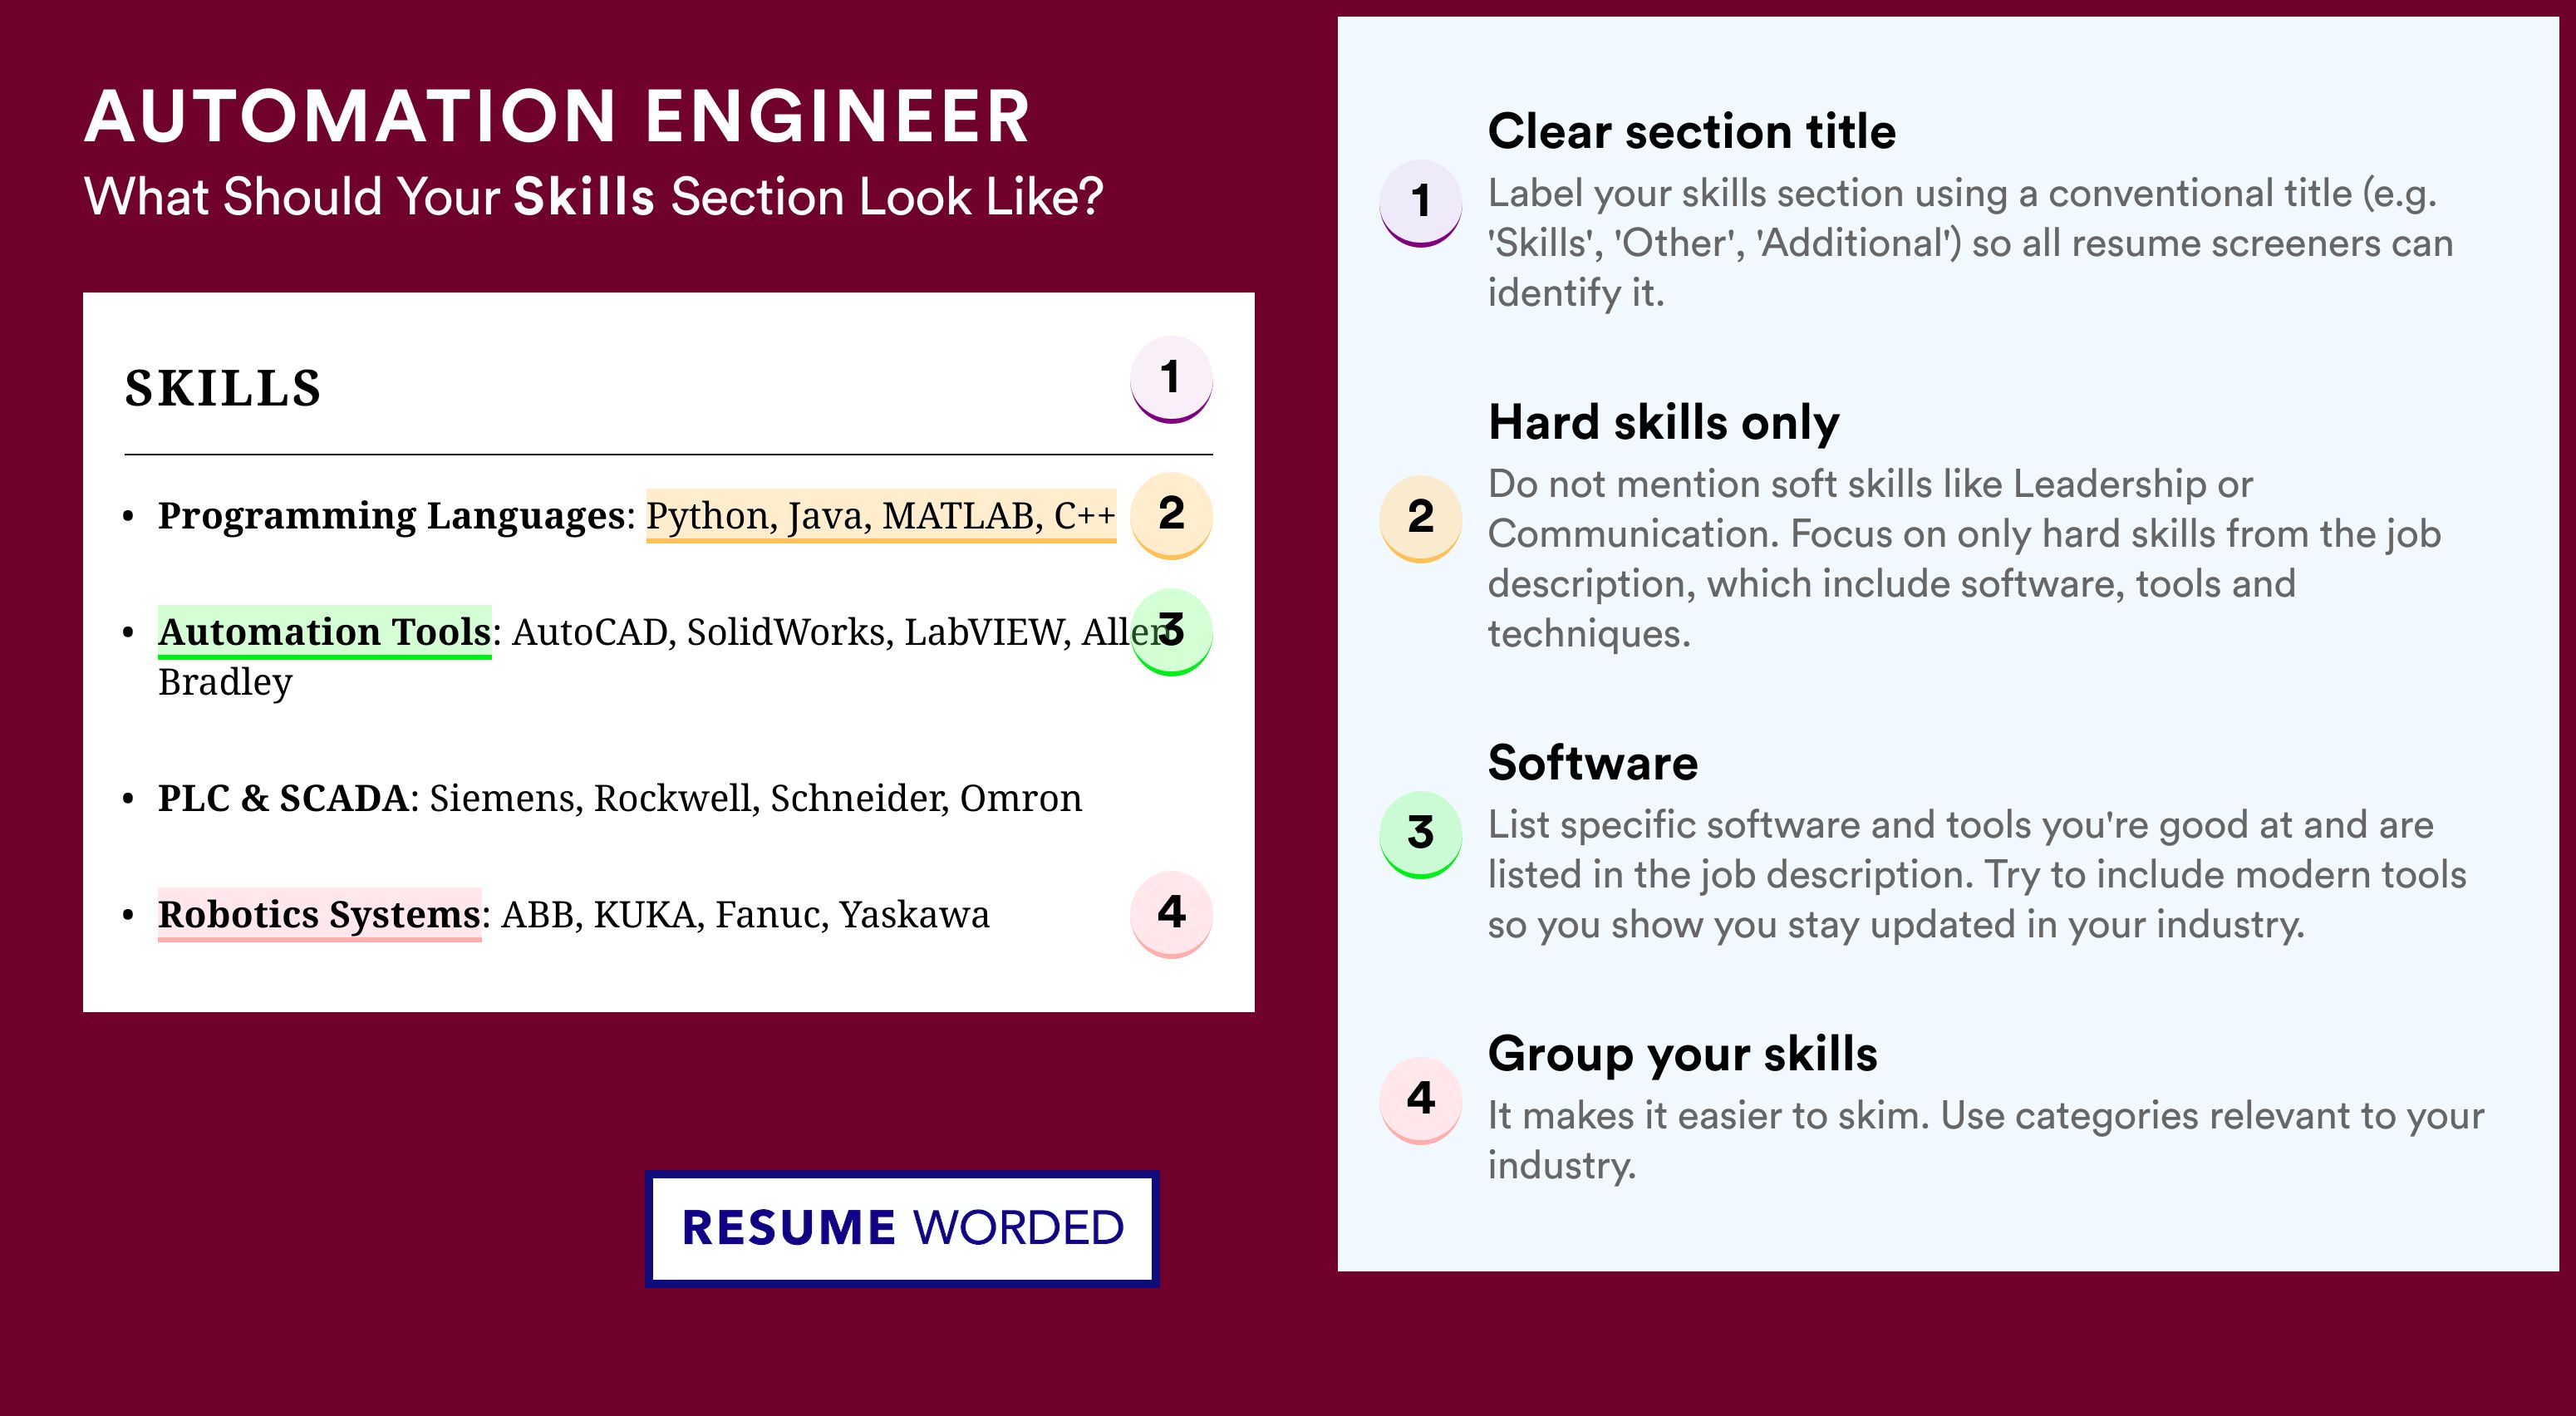 How To Write Your Skills Section - Automation Engineer Roles